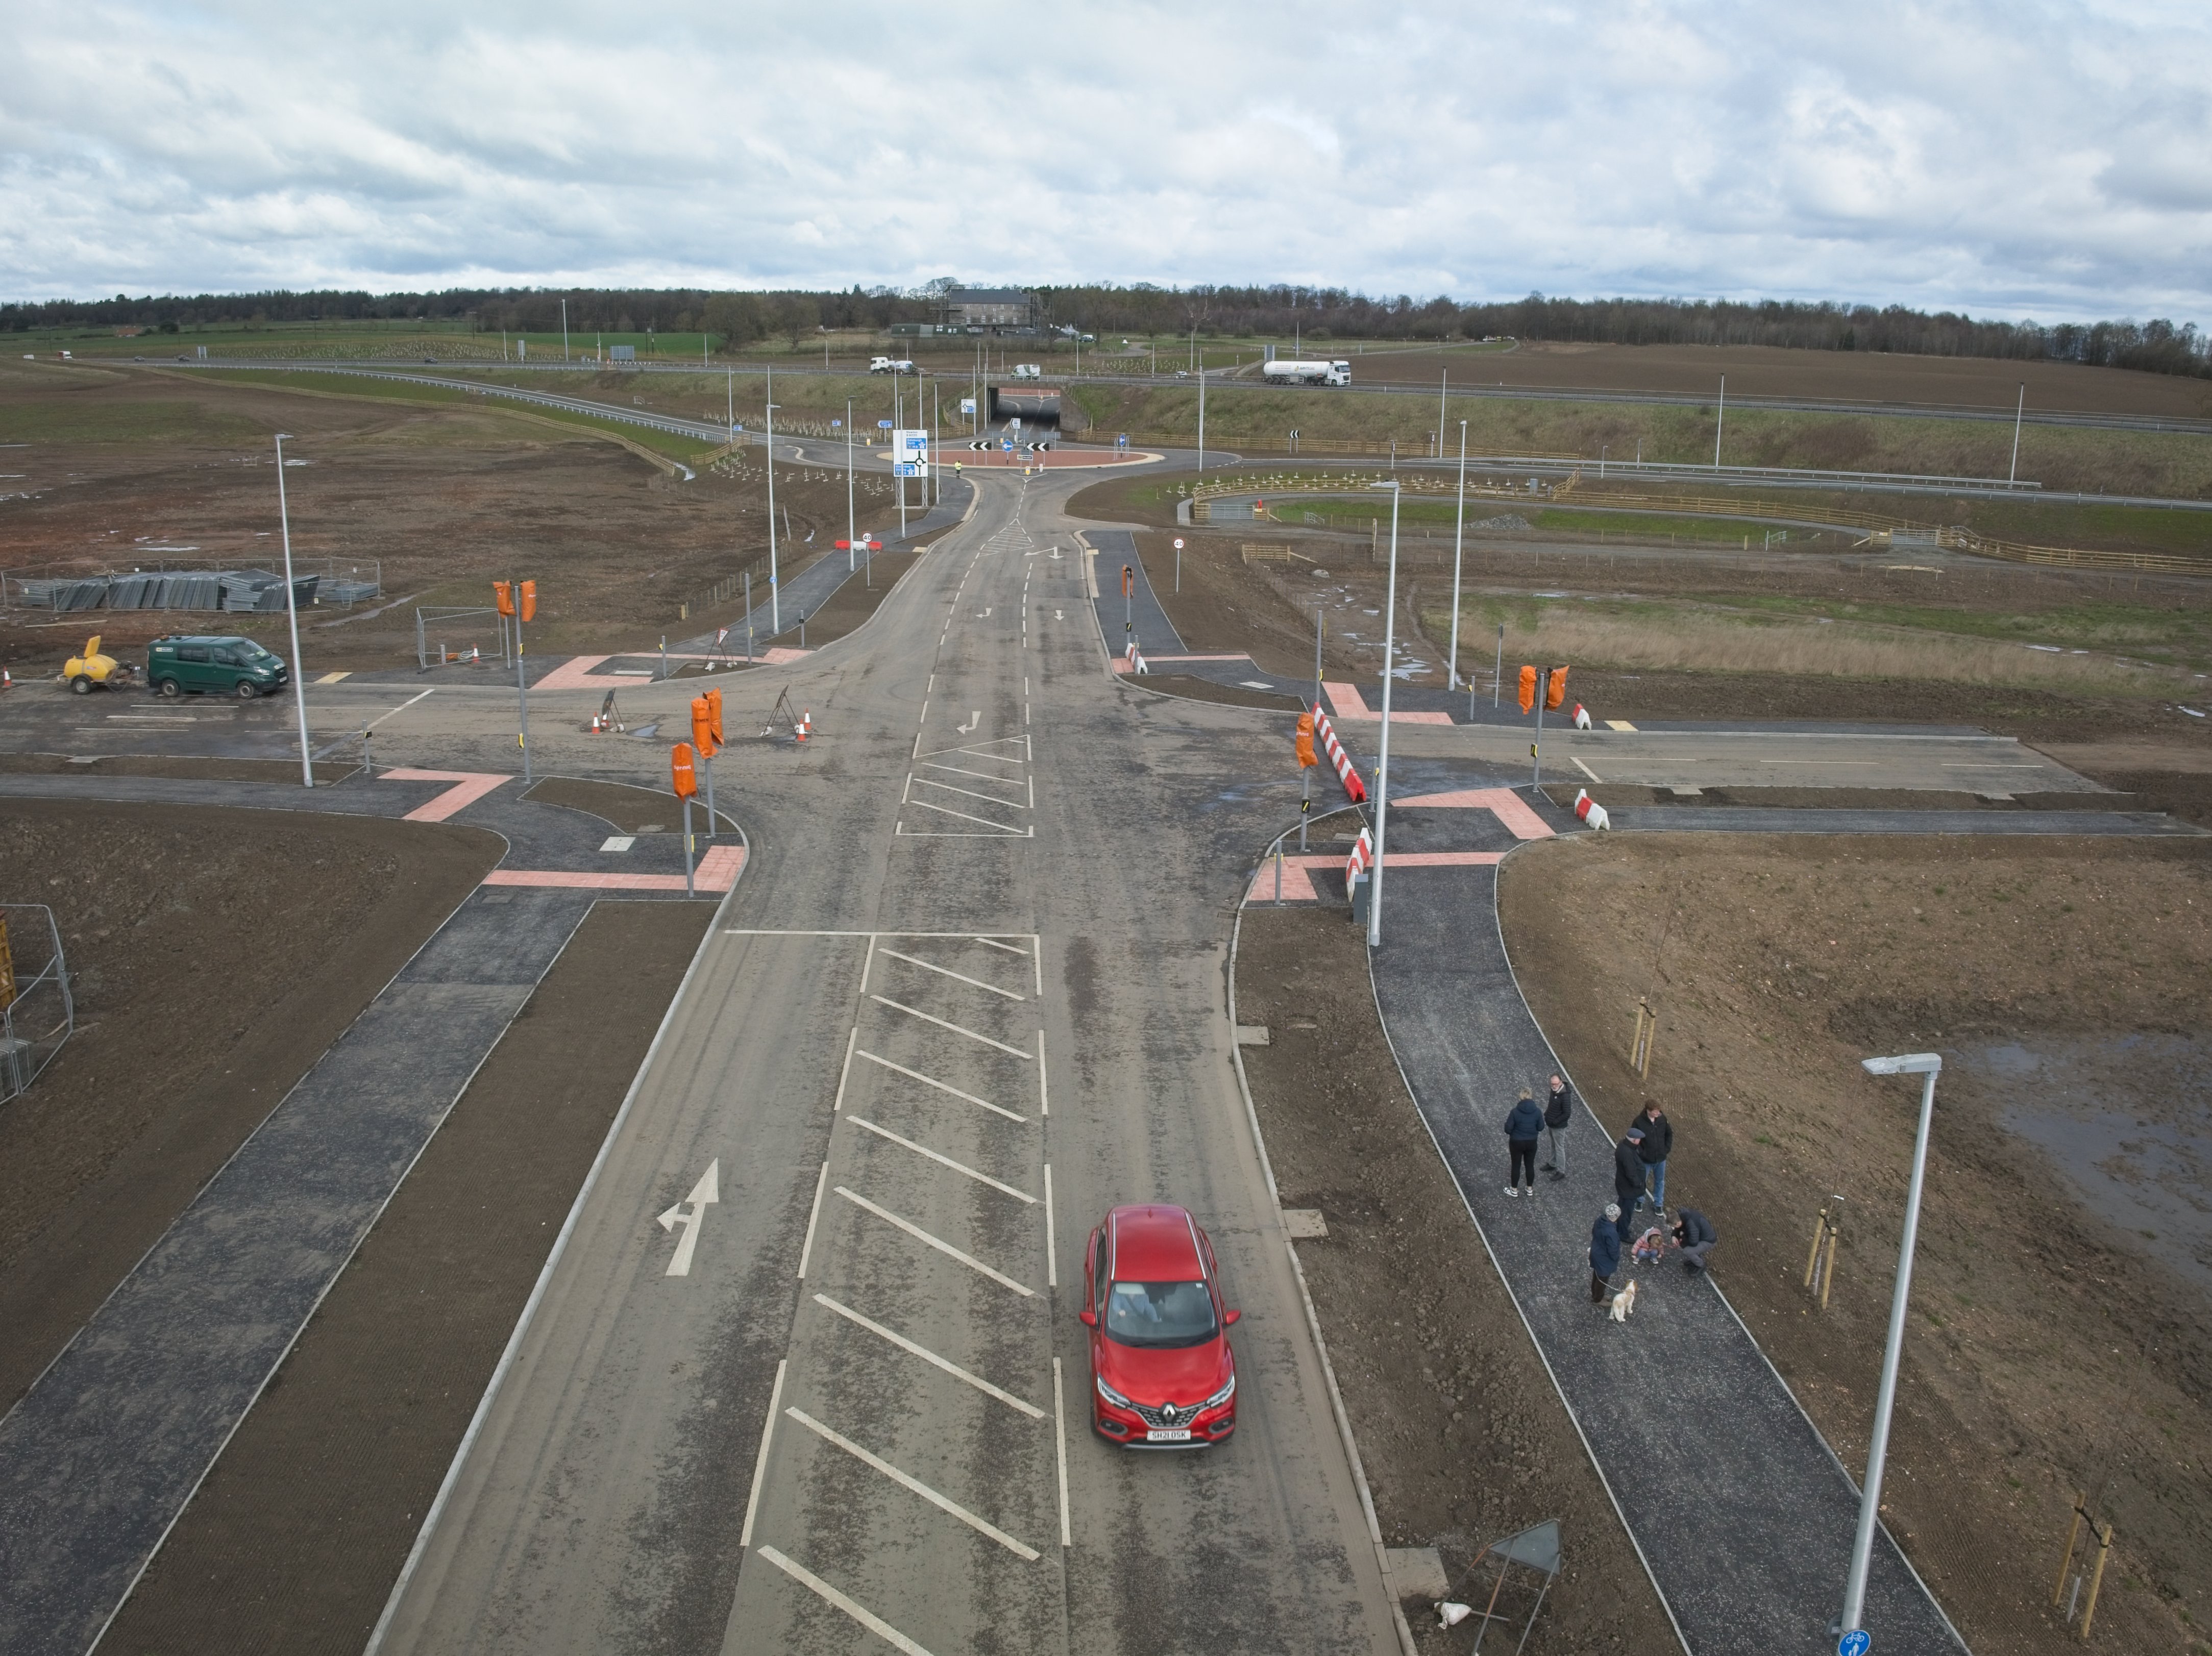 New M9 Junction 1B connects Winchburgh to Edinburgh and beyond